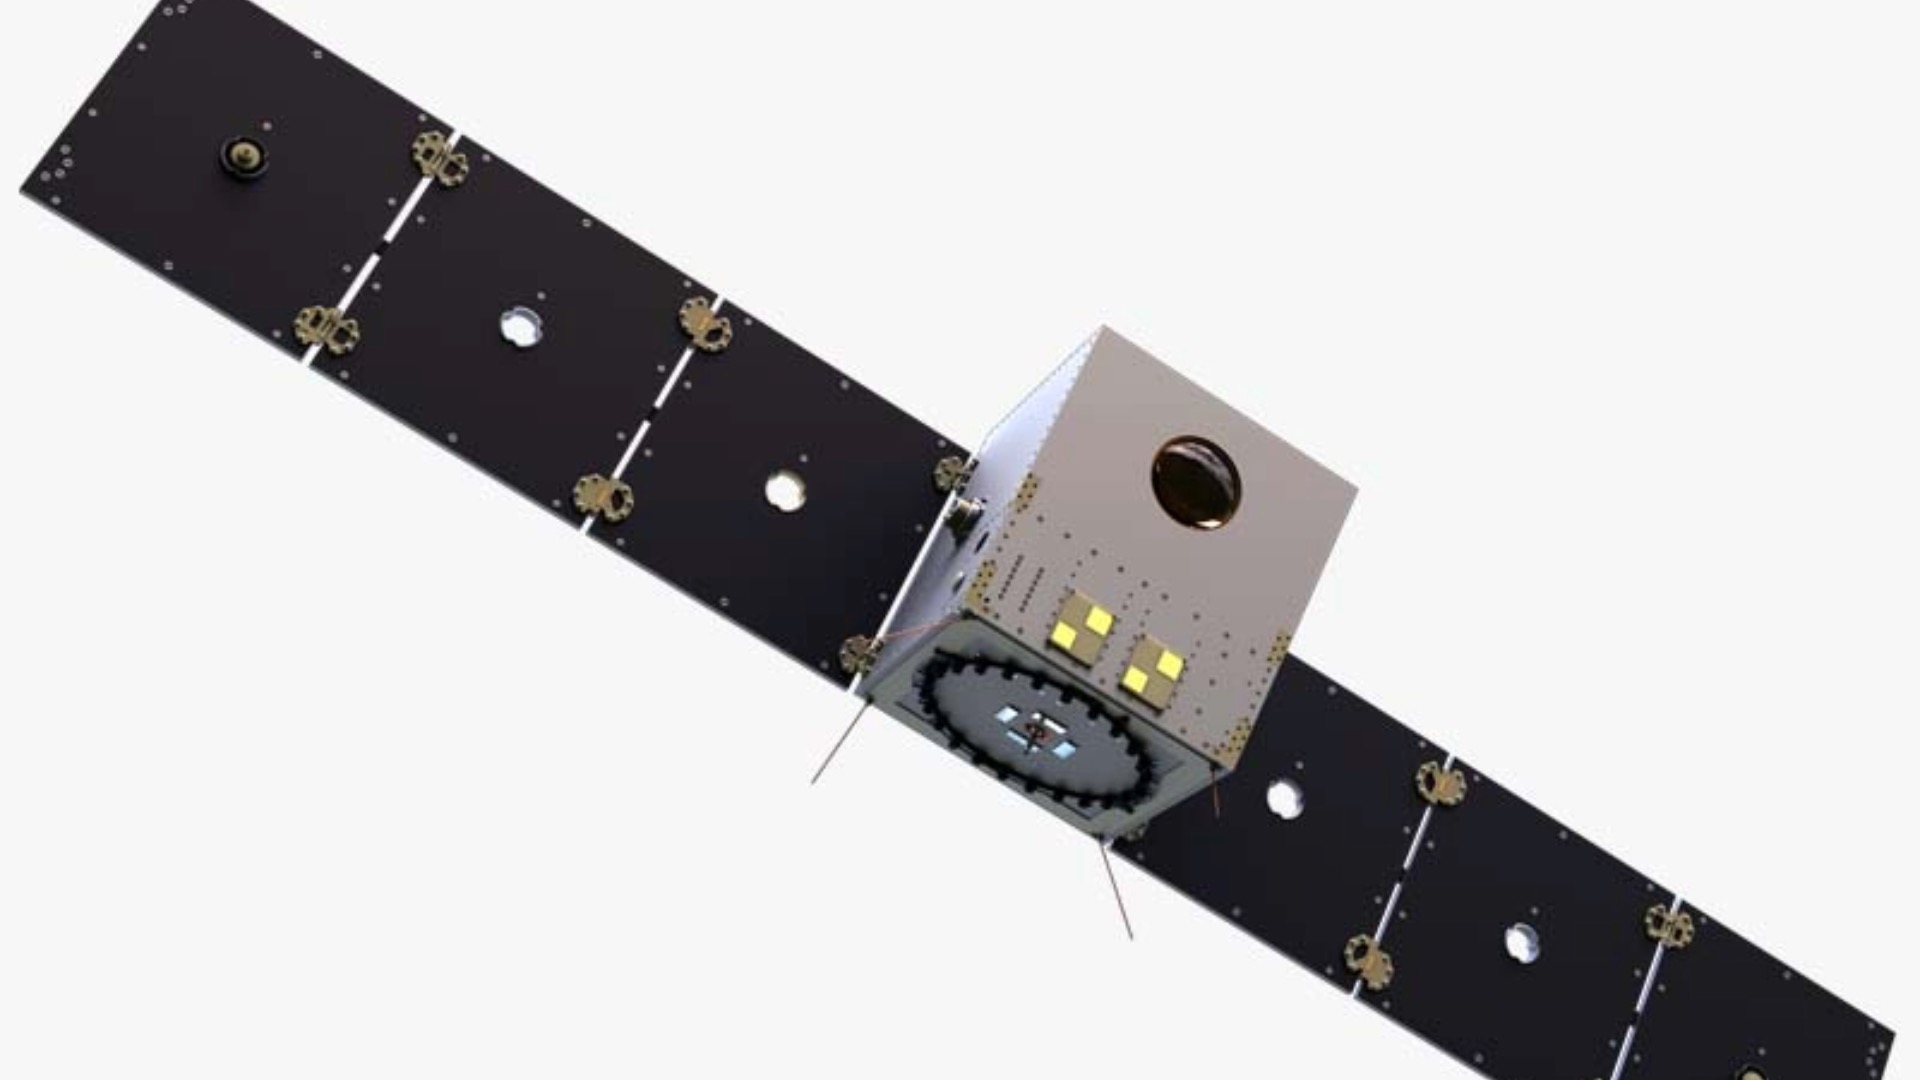 The MP42 microsatellite bus, weighing 242.5 pounds (110 kg), will undergo six-month-long testing.  During the satellite test, the company aims to evaluate the overall operation of its VHF (Very High Frequency) radio communication systems and ADS-B (Automatic Dependent Surveillance-Broadcast) surveillance systems from space.